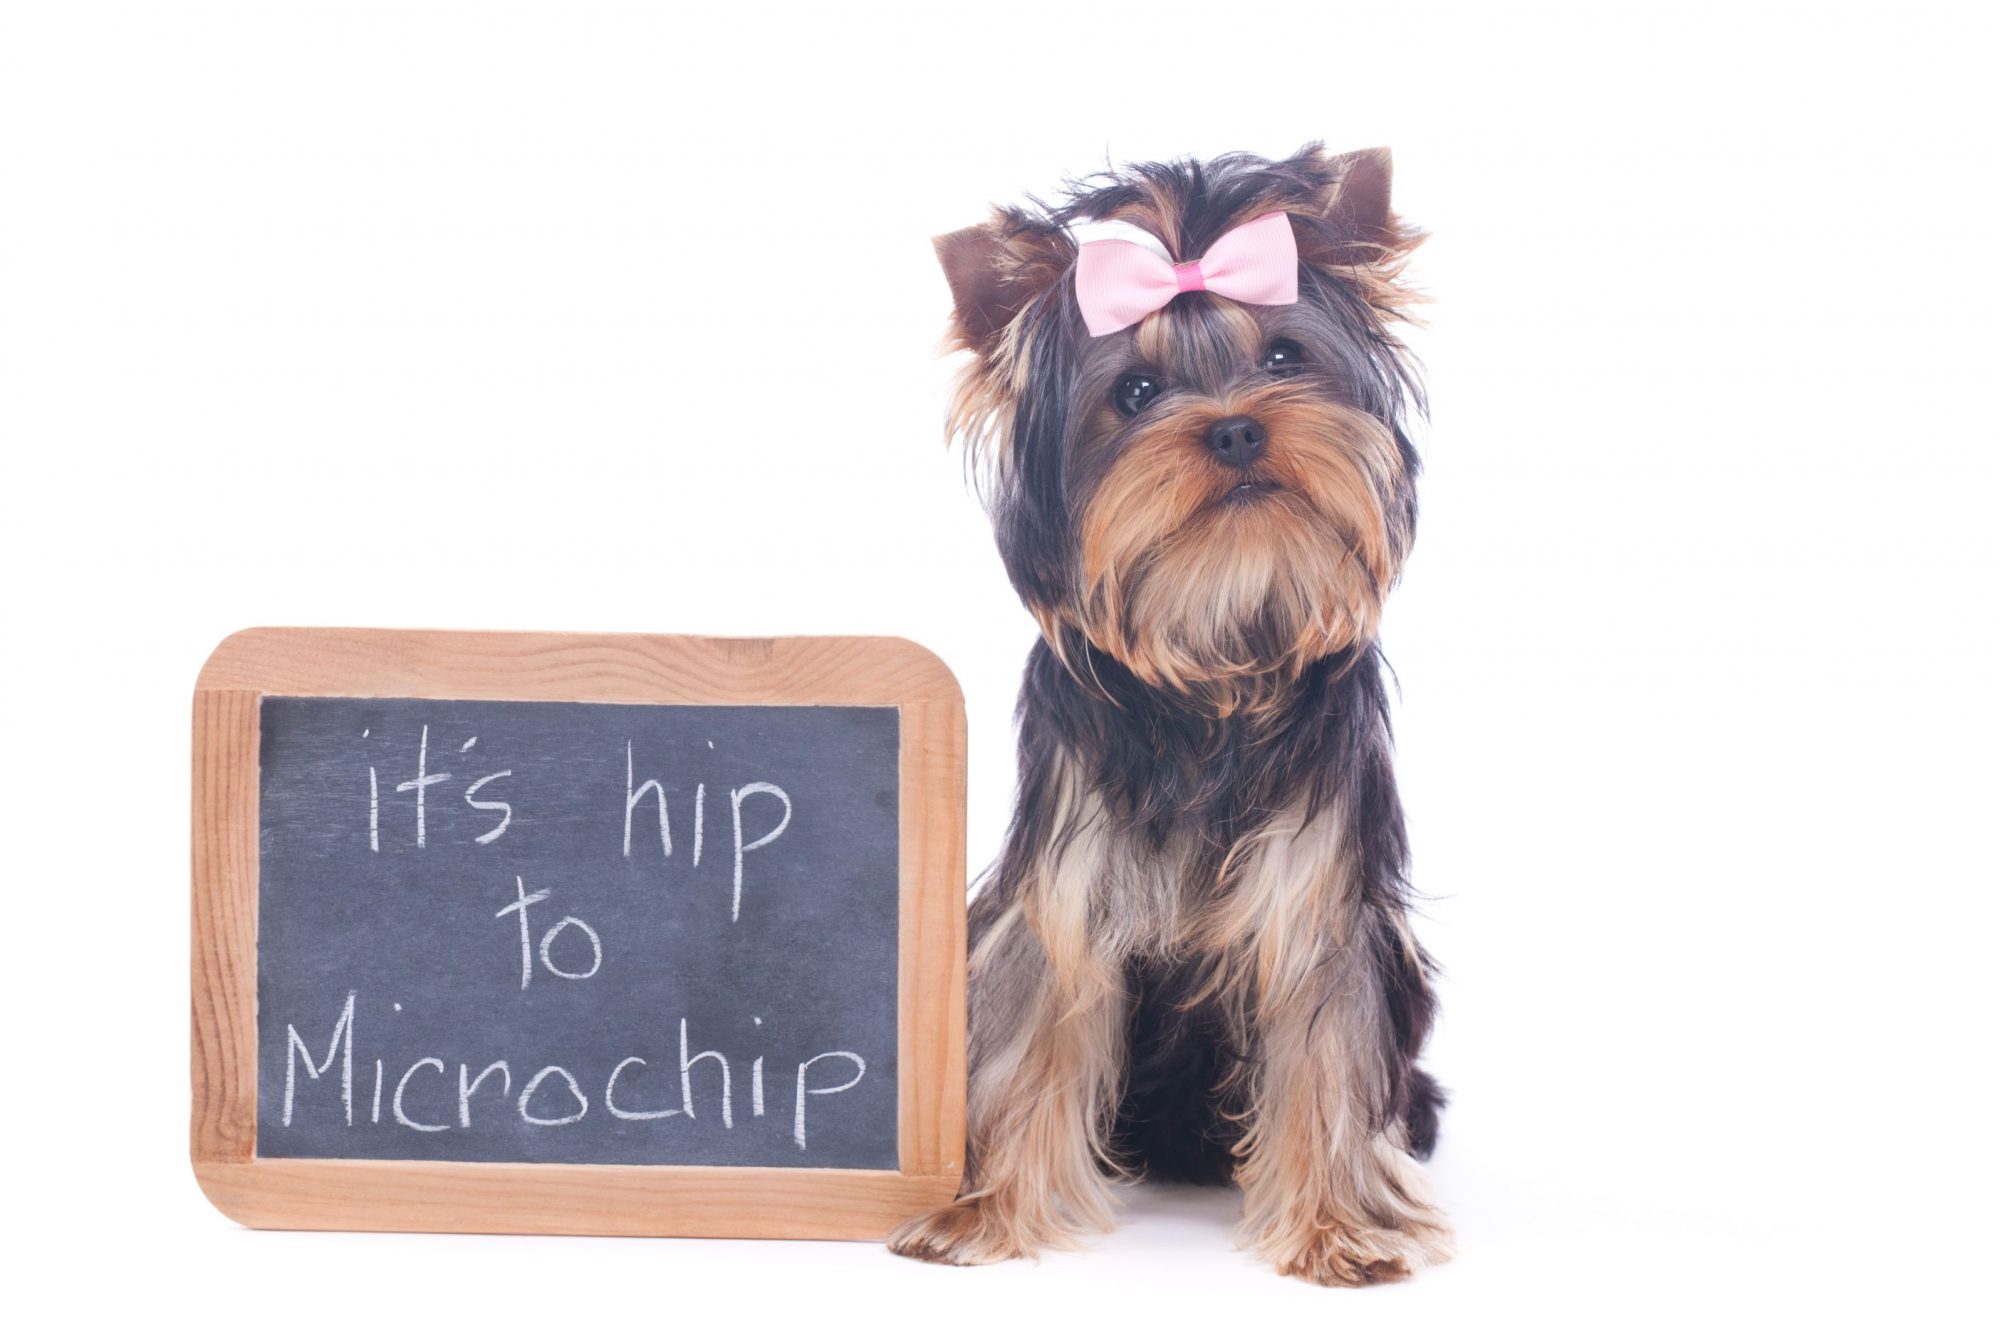 Yorkshire terrier wearing bow sitting next to chalkboard.